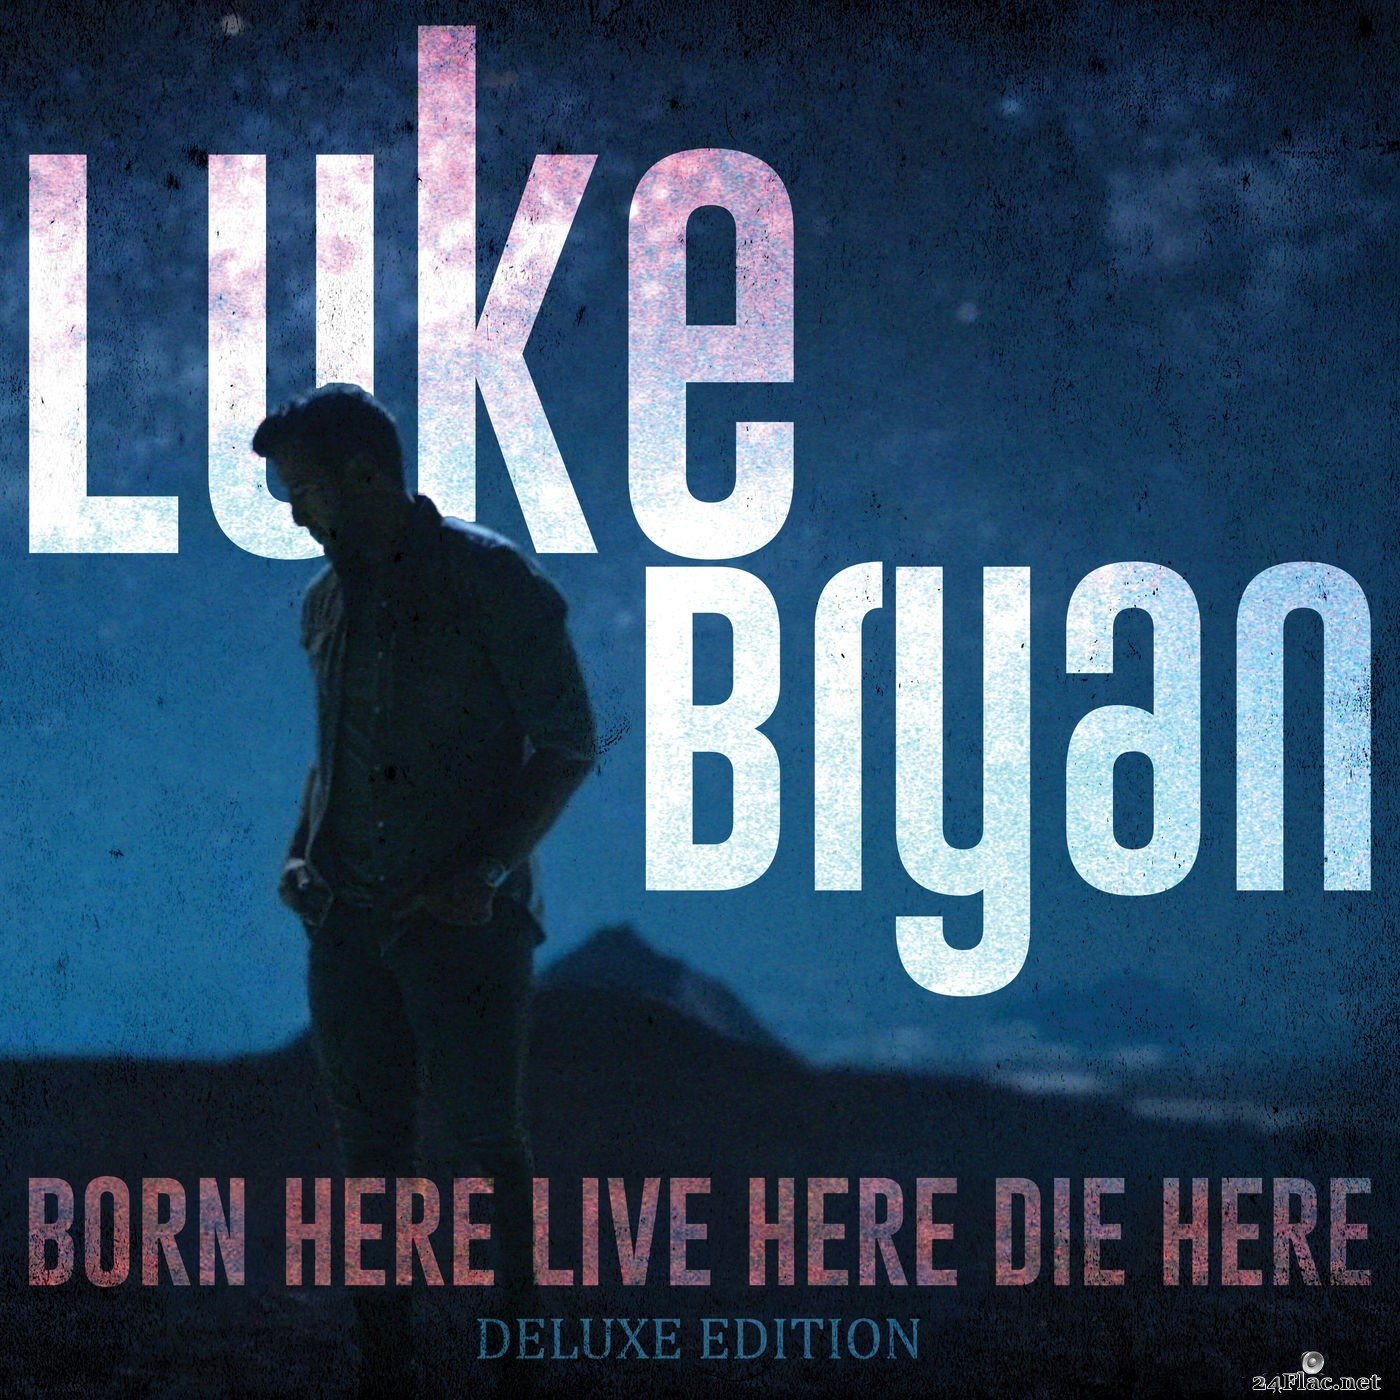 Luke Bryan - Born Here Live Here Die Here (Deluxe Edition) (2021) Hi-Res